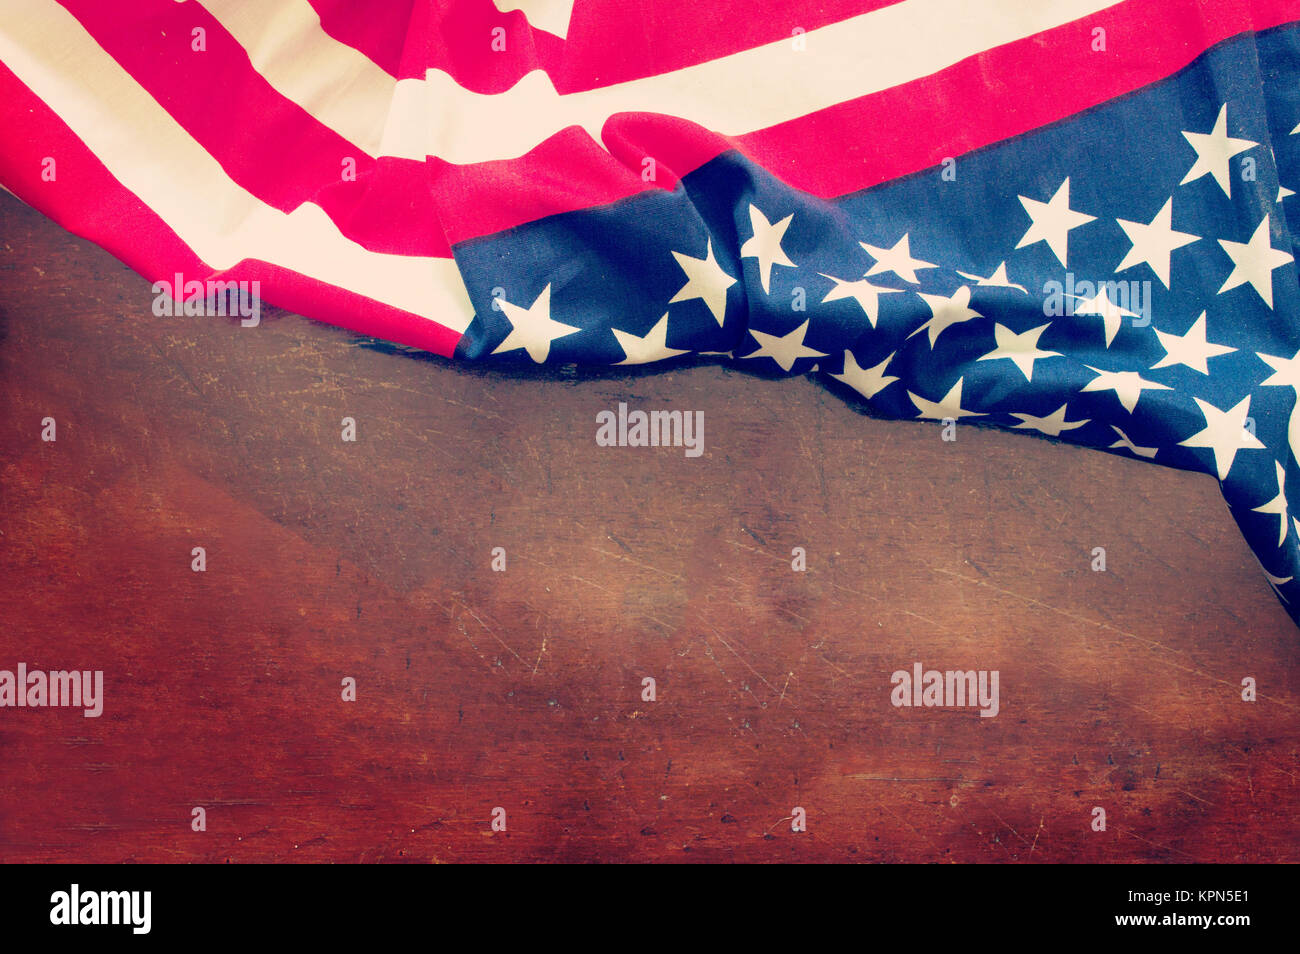 American flag on grunge wooden background Stock Photo